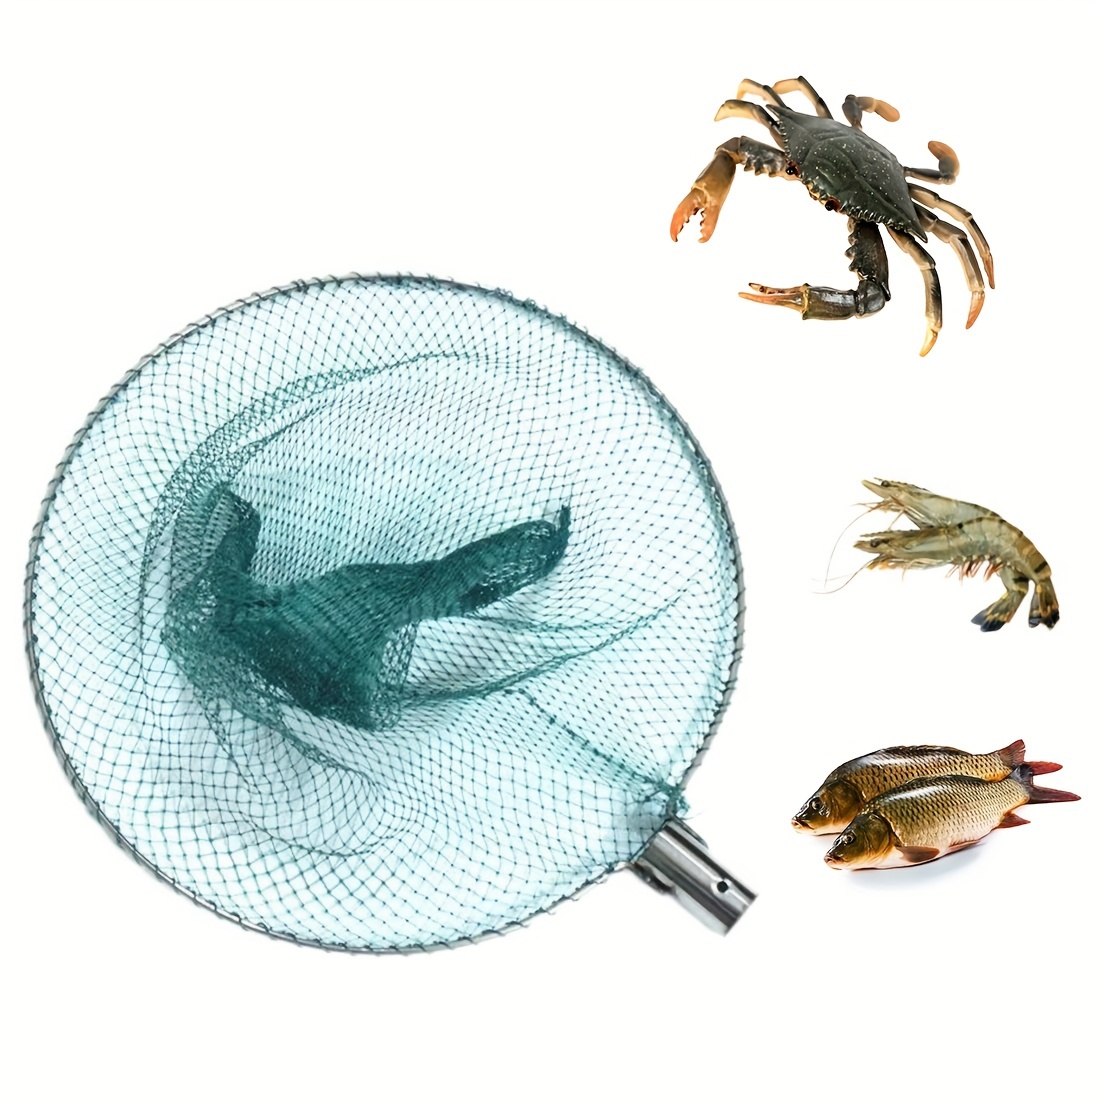 1,800+ Fishing Net Underwater Stock Photos, Pictures & Royalty